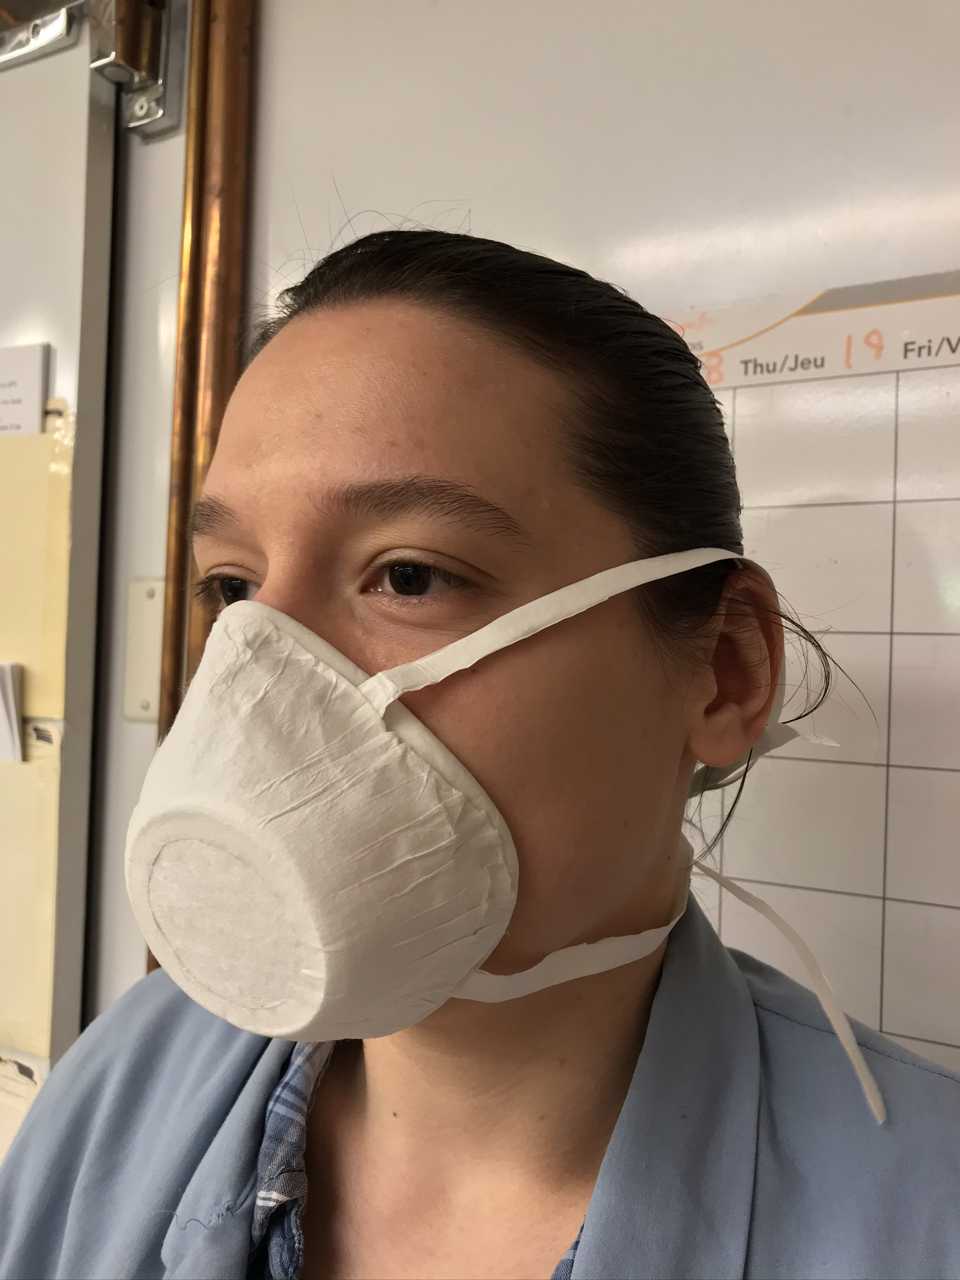 Researchers create biodegradable medical masks for COVID-19